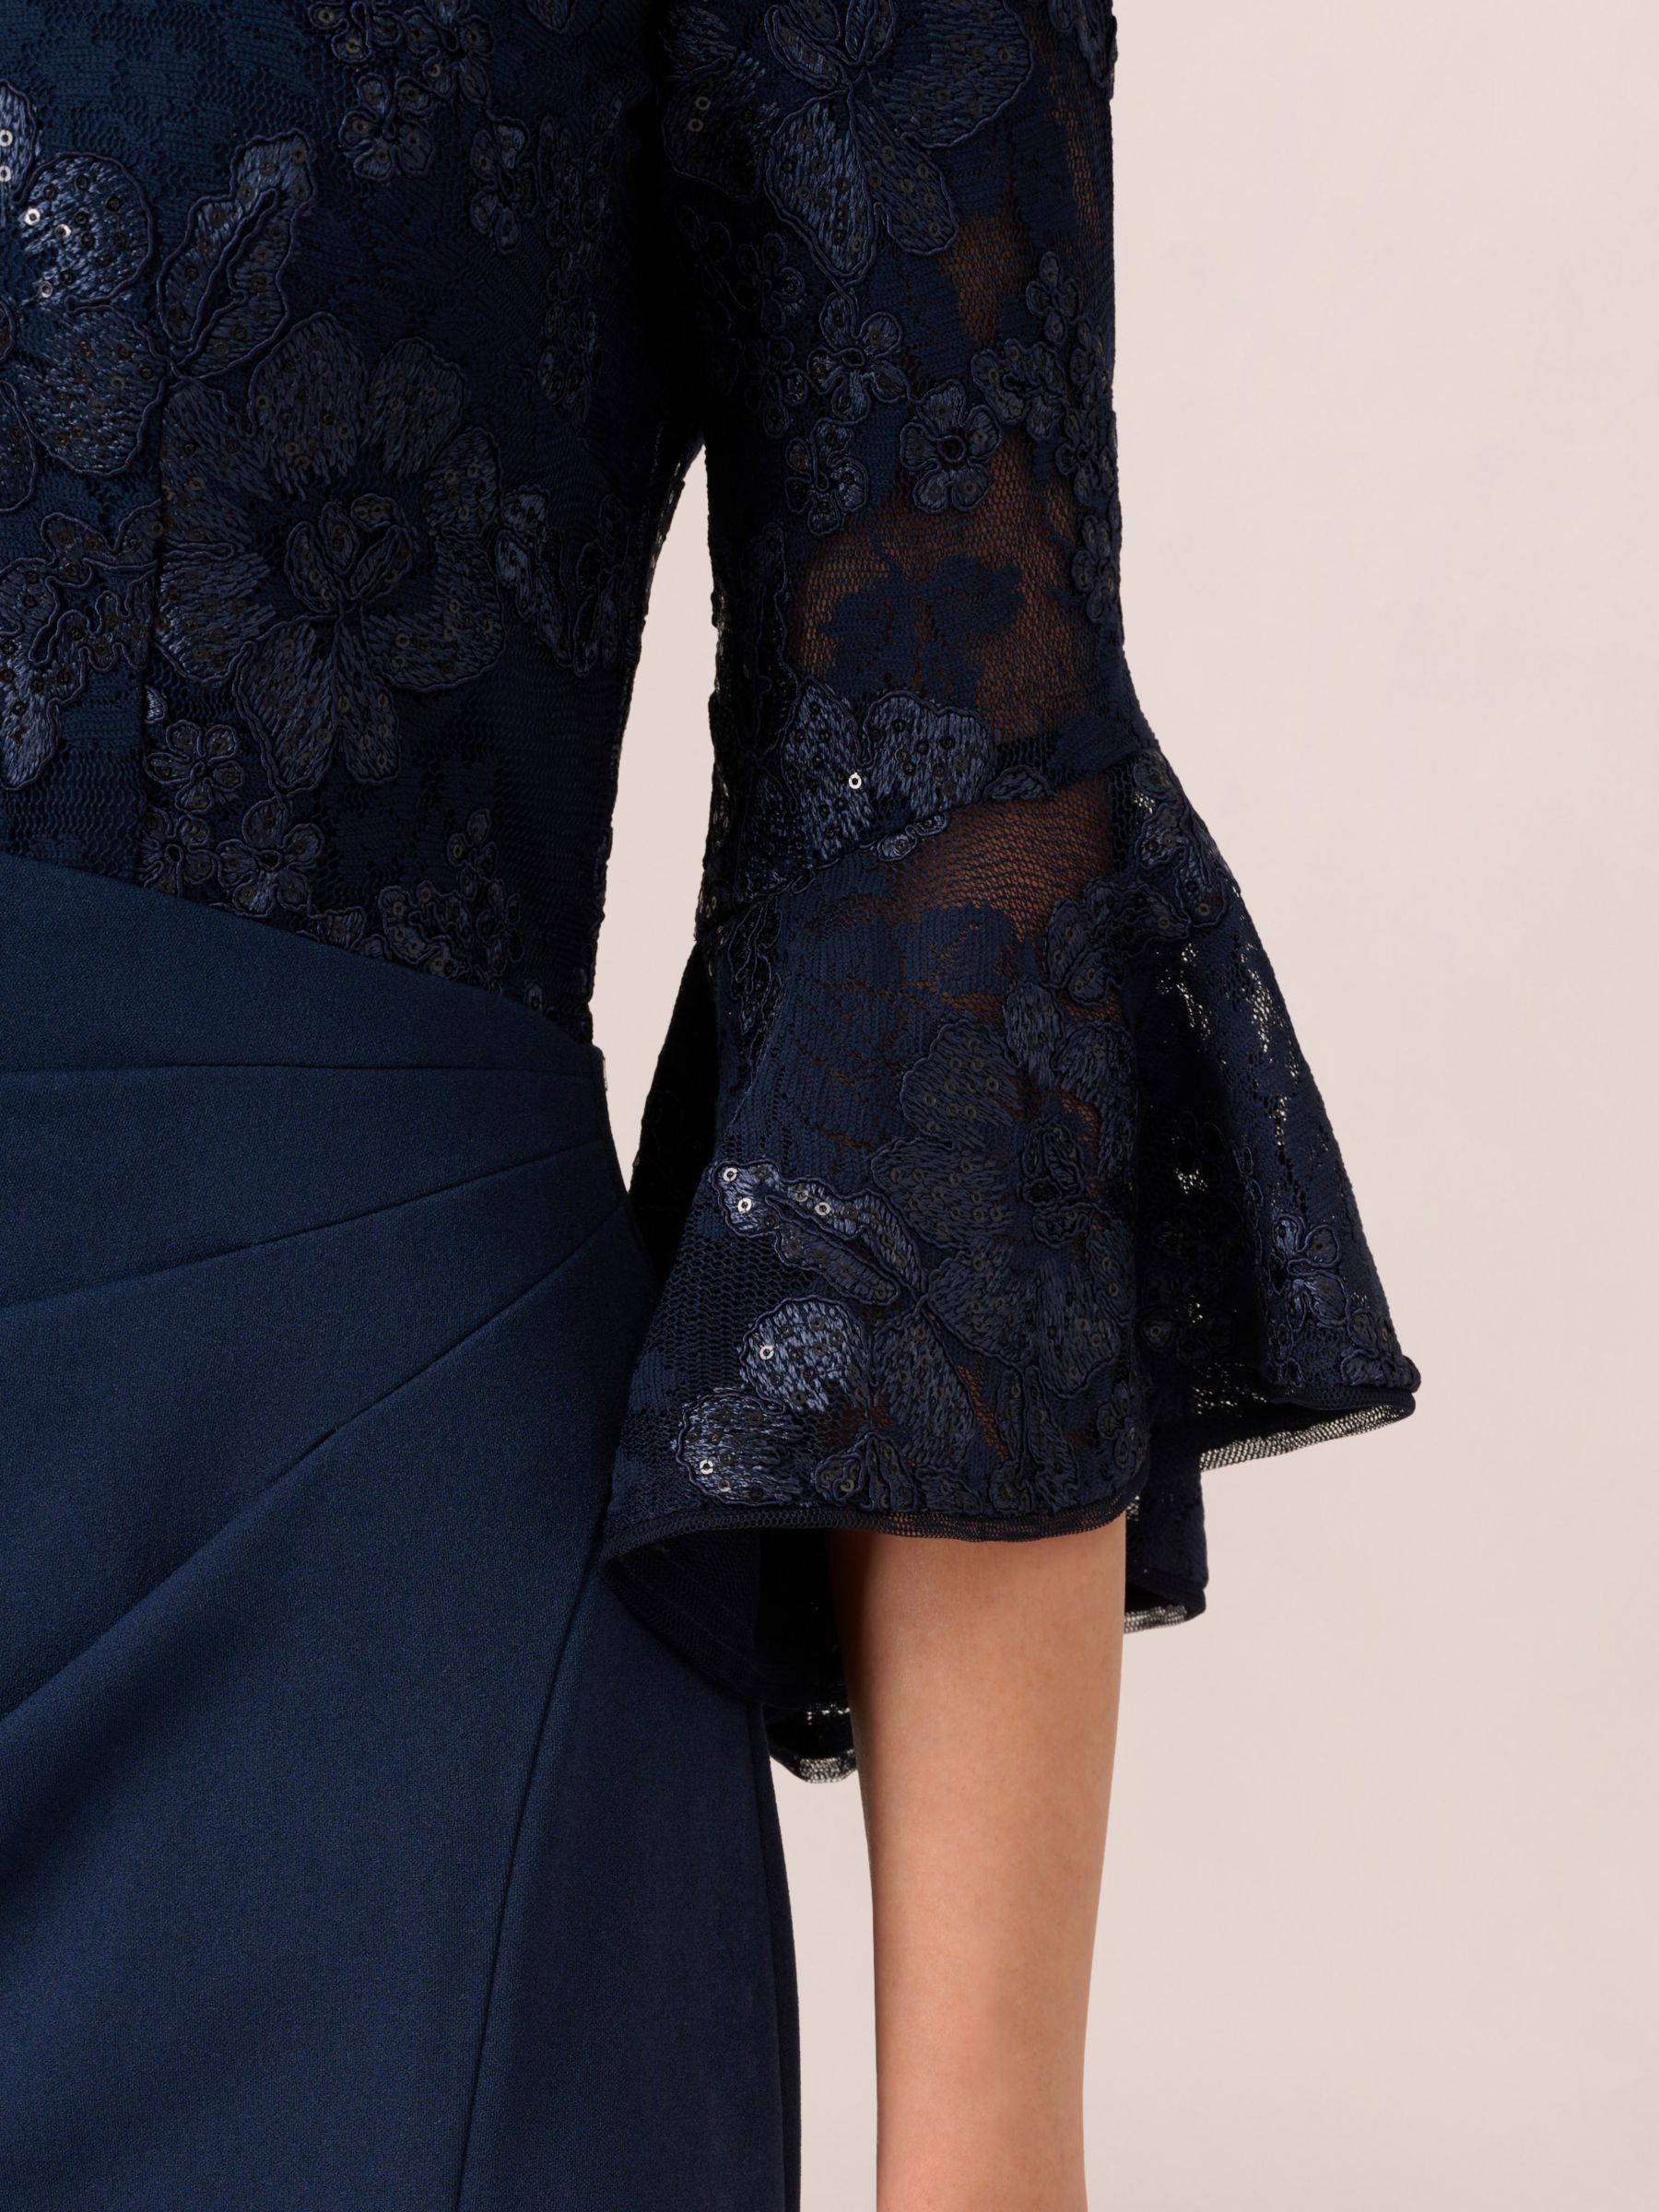 Buy Adrianna Papell Floral Lace Combo Sheath Dress, Navy Online at johnlewis.com